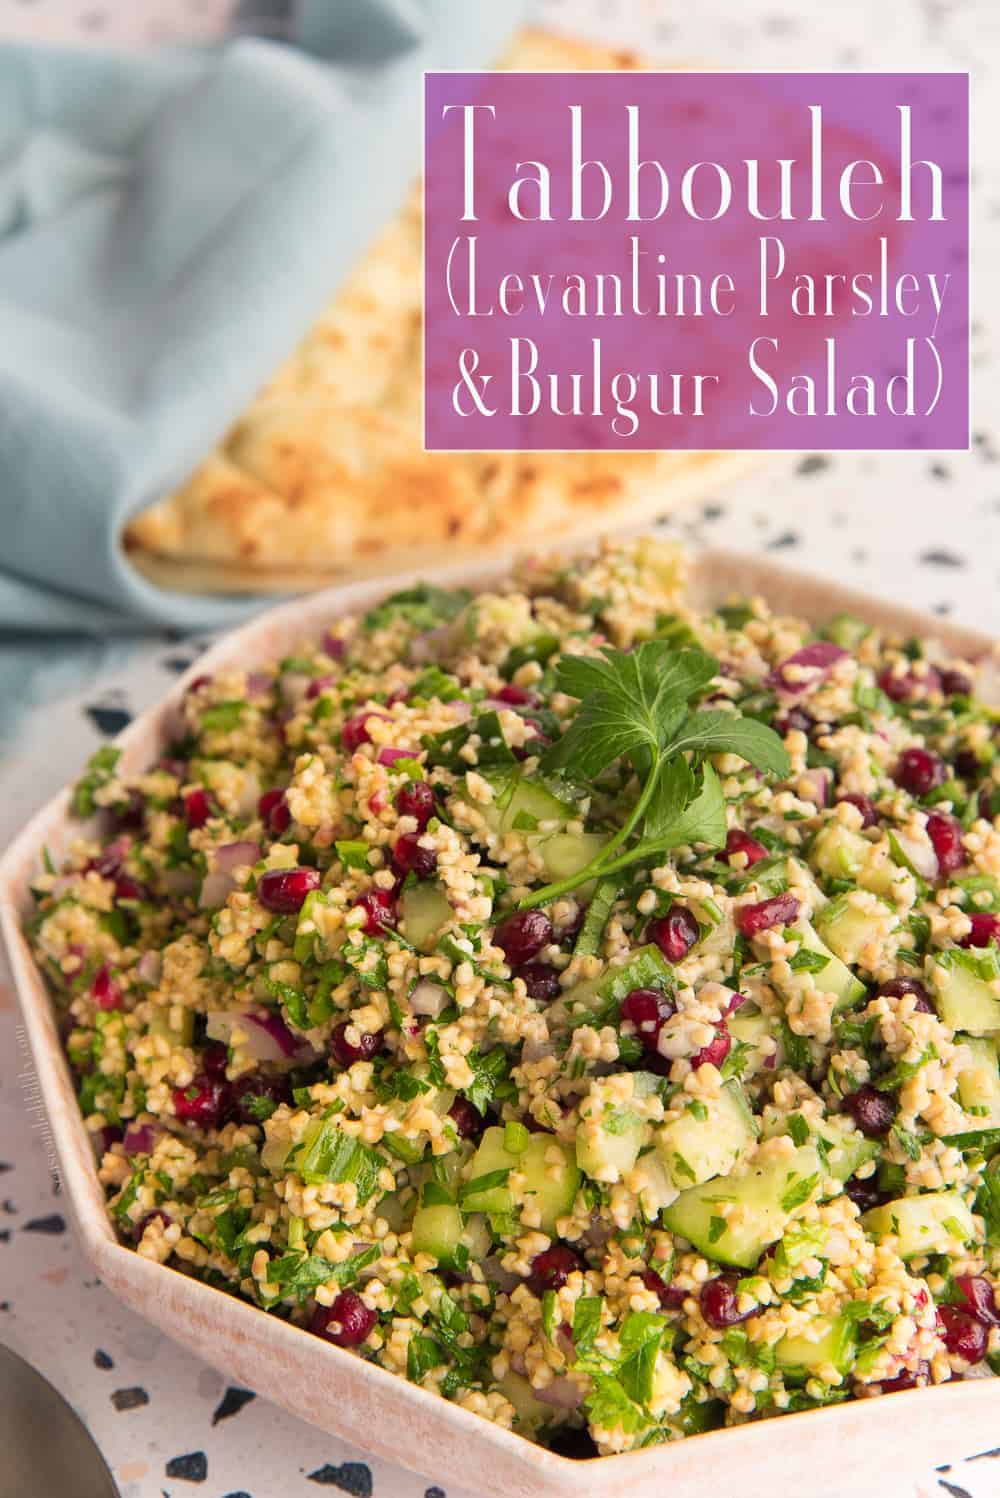 Tabbouleh is a Parsley and Bulgur Salad that originated in the Levant. It's a filling vegan dish that can be served as a side or as an entree. Serve it as is for a plant-based dish or add grilled chicken or seafood for a heartier meal. #tabbouleh #bulgur #parsely #MiddleEastern #Levantine #Meditteranean #cooking #bulgurrecipe #tabboulehrecipe #veganrecipe #vegetarianrecipe via @ediblesense